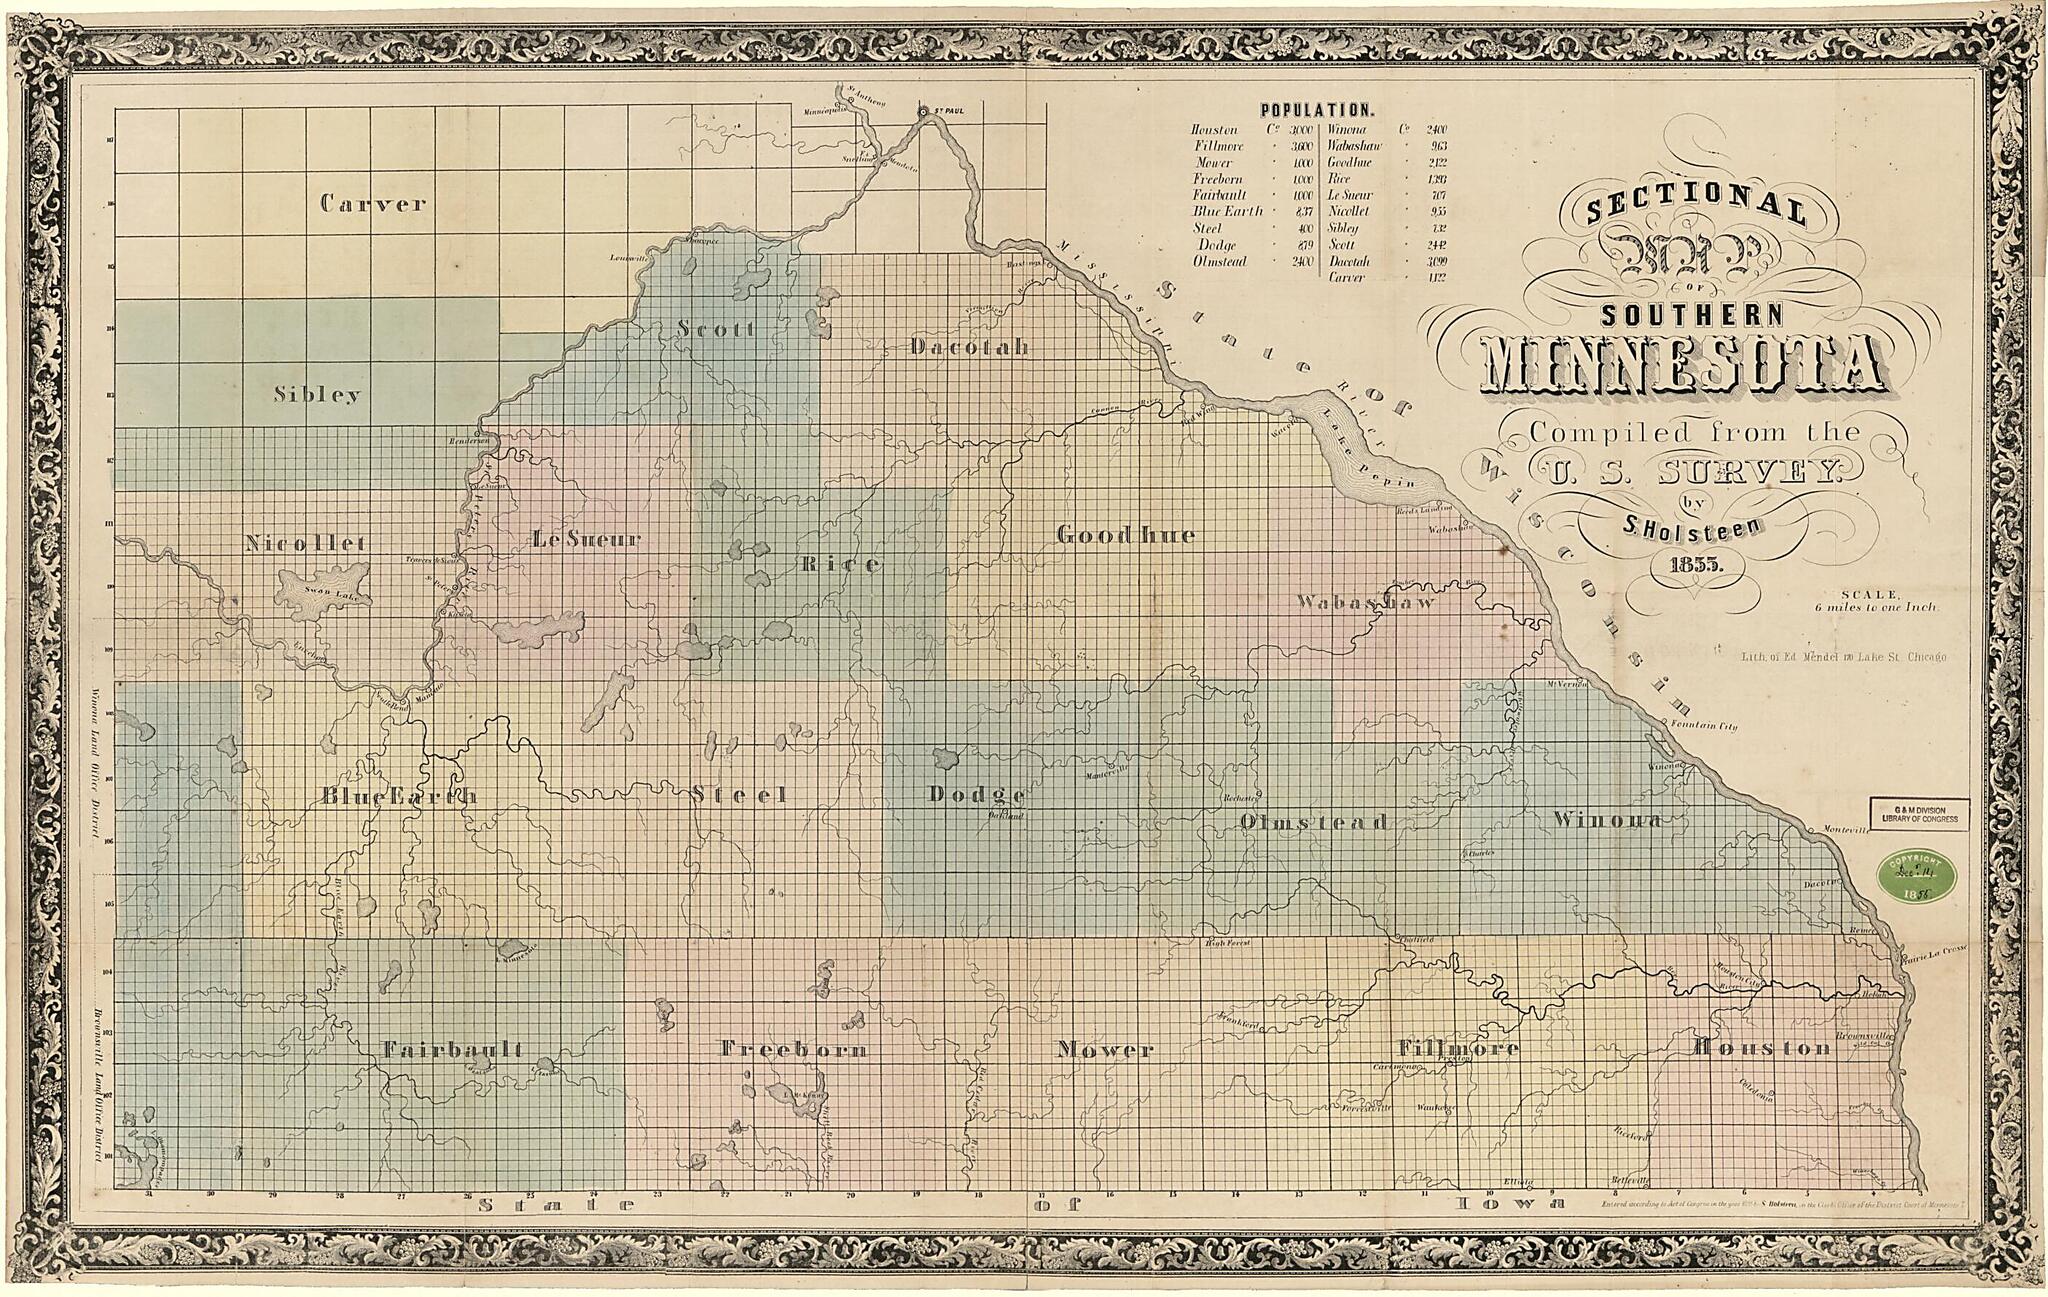 This old map of Sectional Map of Southern Minnesota from 1855 was created by S. Holsteen, Edward Mendel in 1855